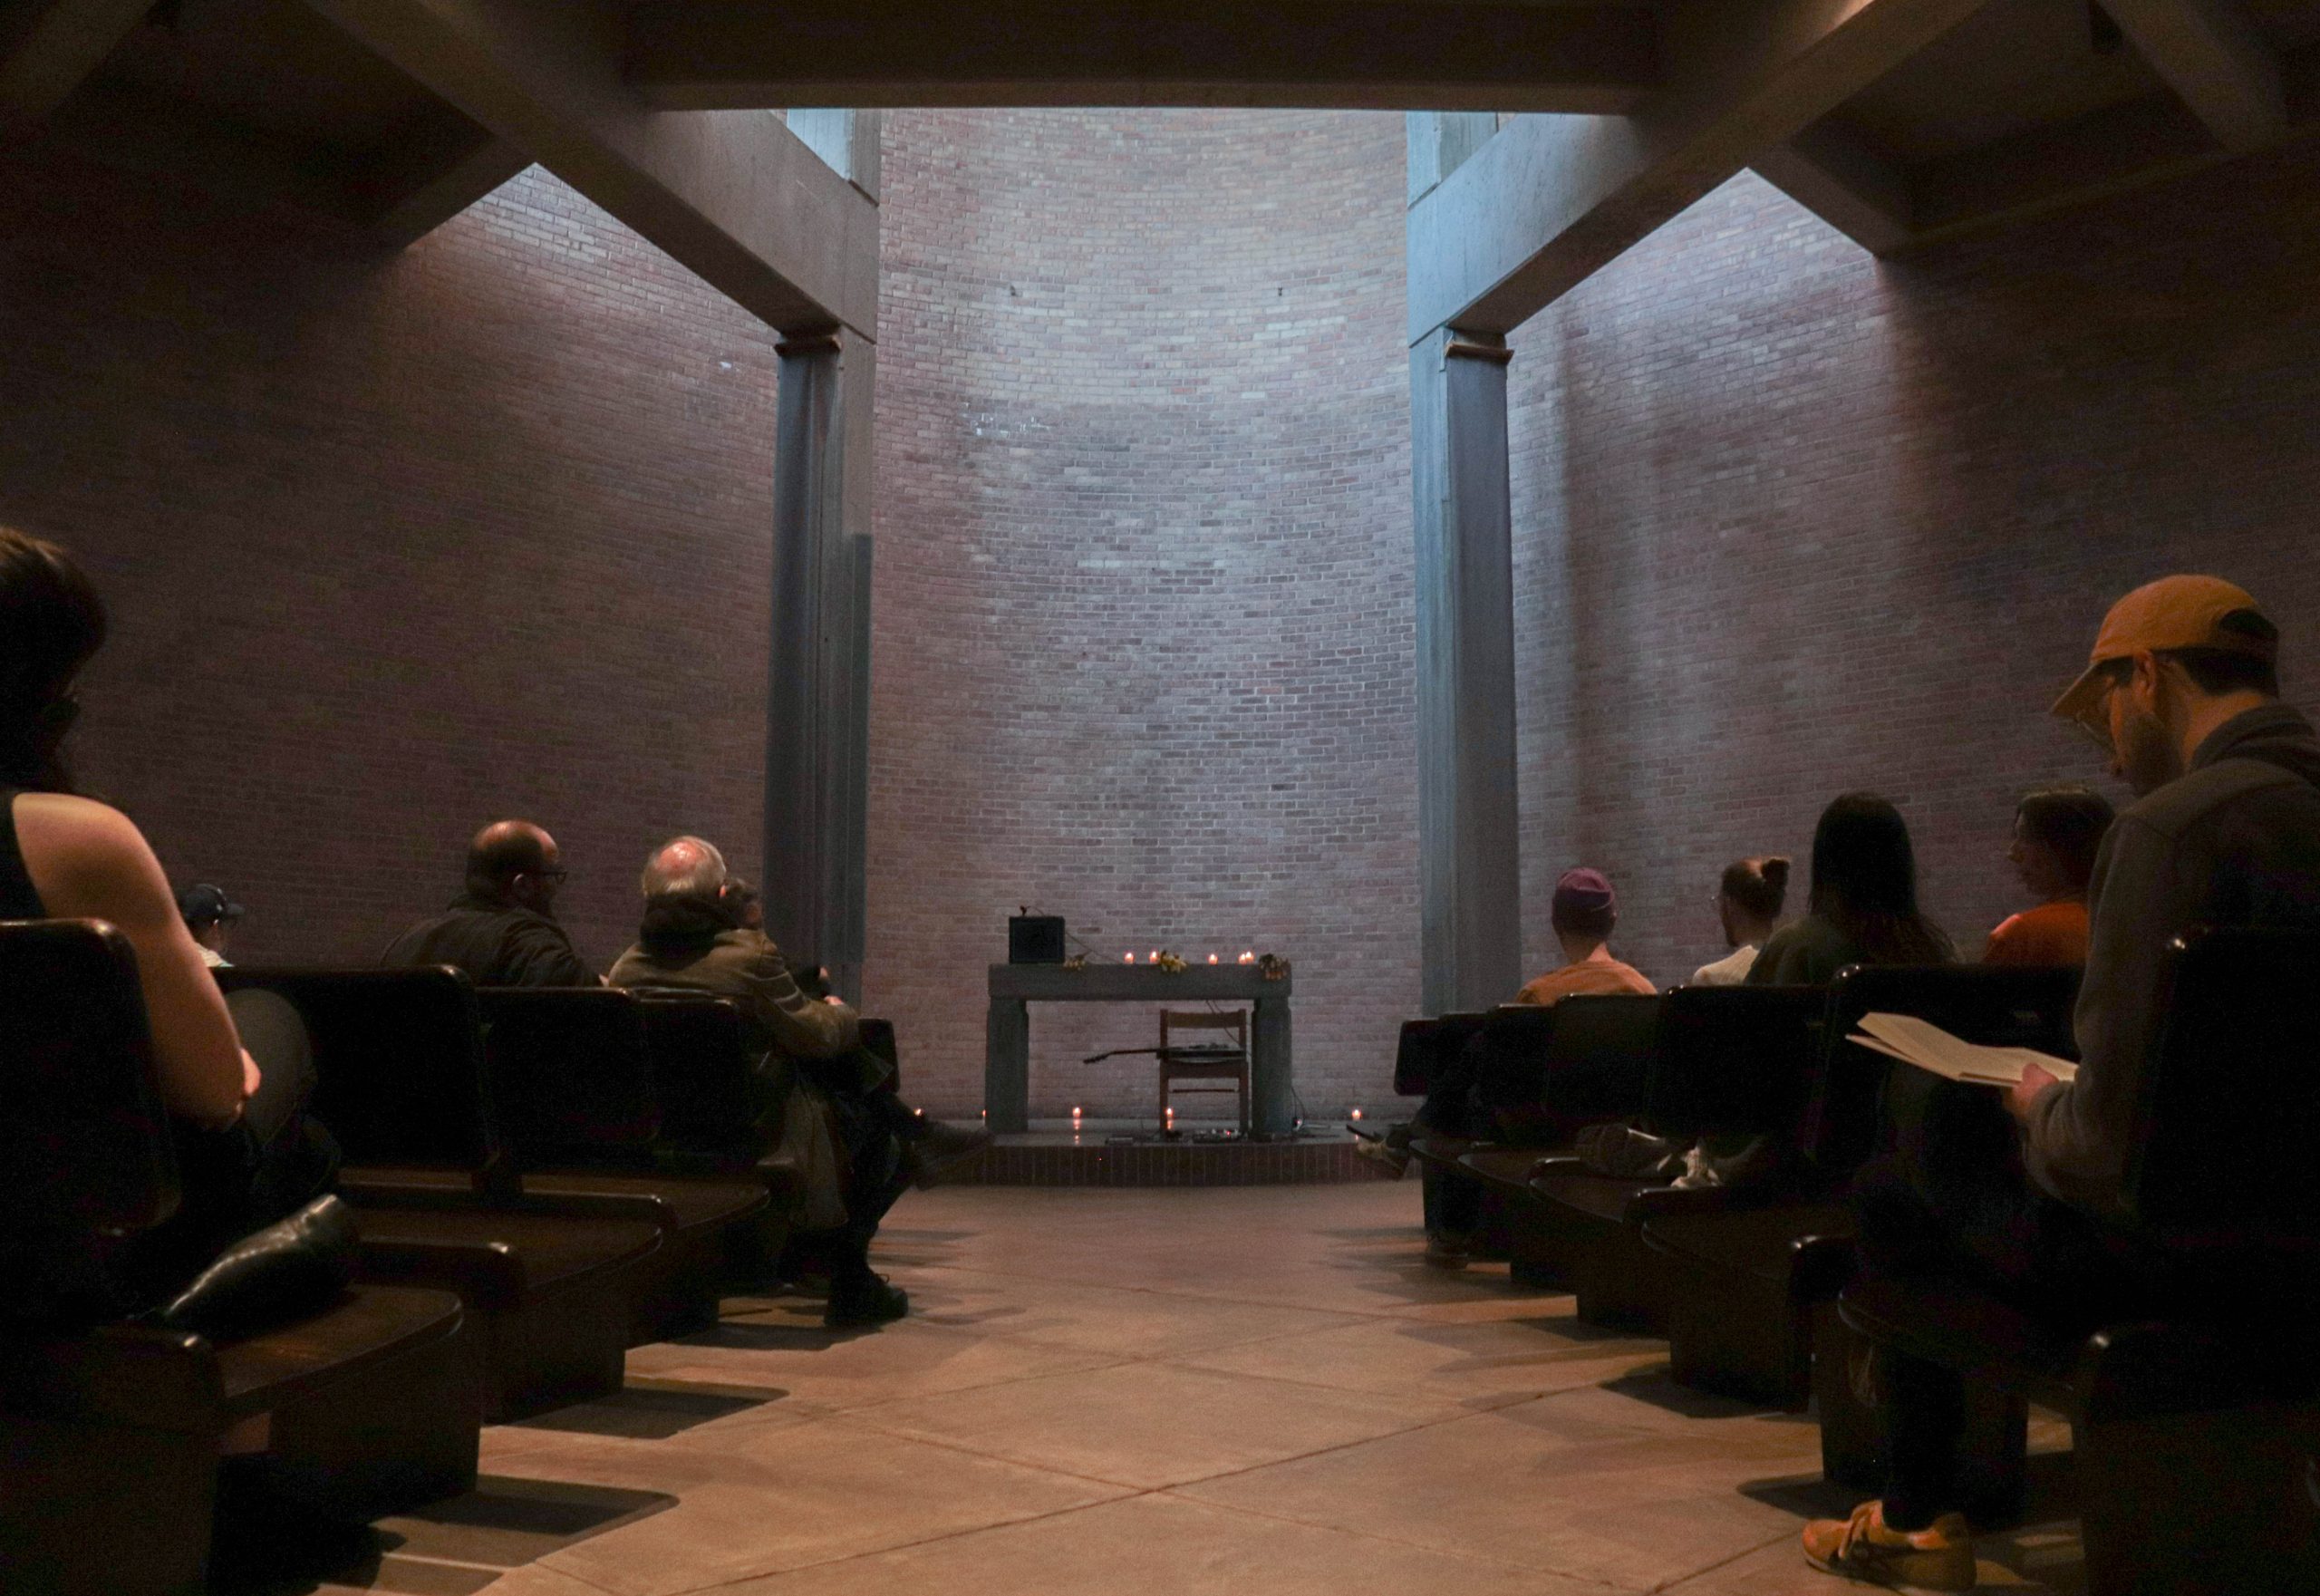 Image: People sit in the pews at Augustana Lutheran Church to participate in the Deep Listening Workshop. Light streams in from above, illuminating a small stage where a table and chair, candles, a guitar, and an amplifier are arranged as if waiting performance. Photo courtesy of Livy Snyder.